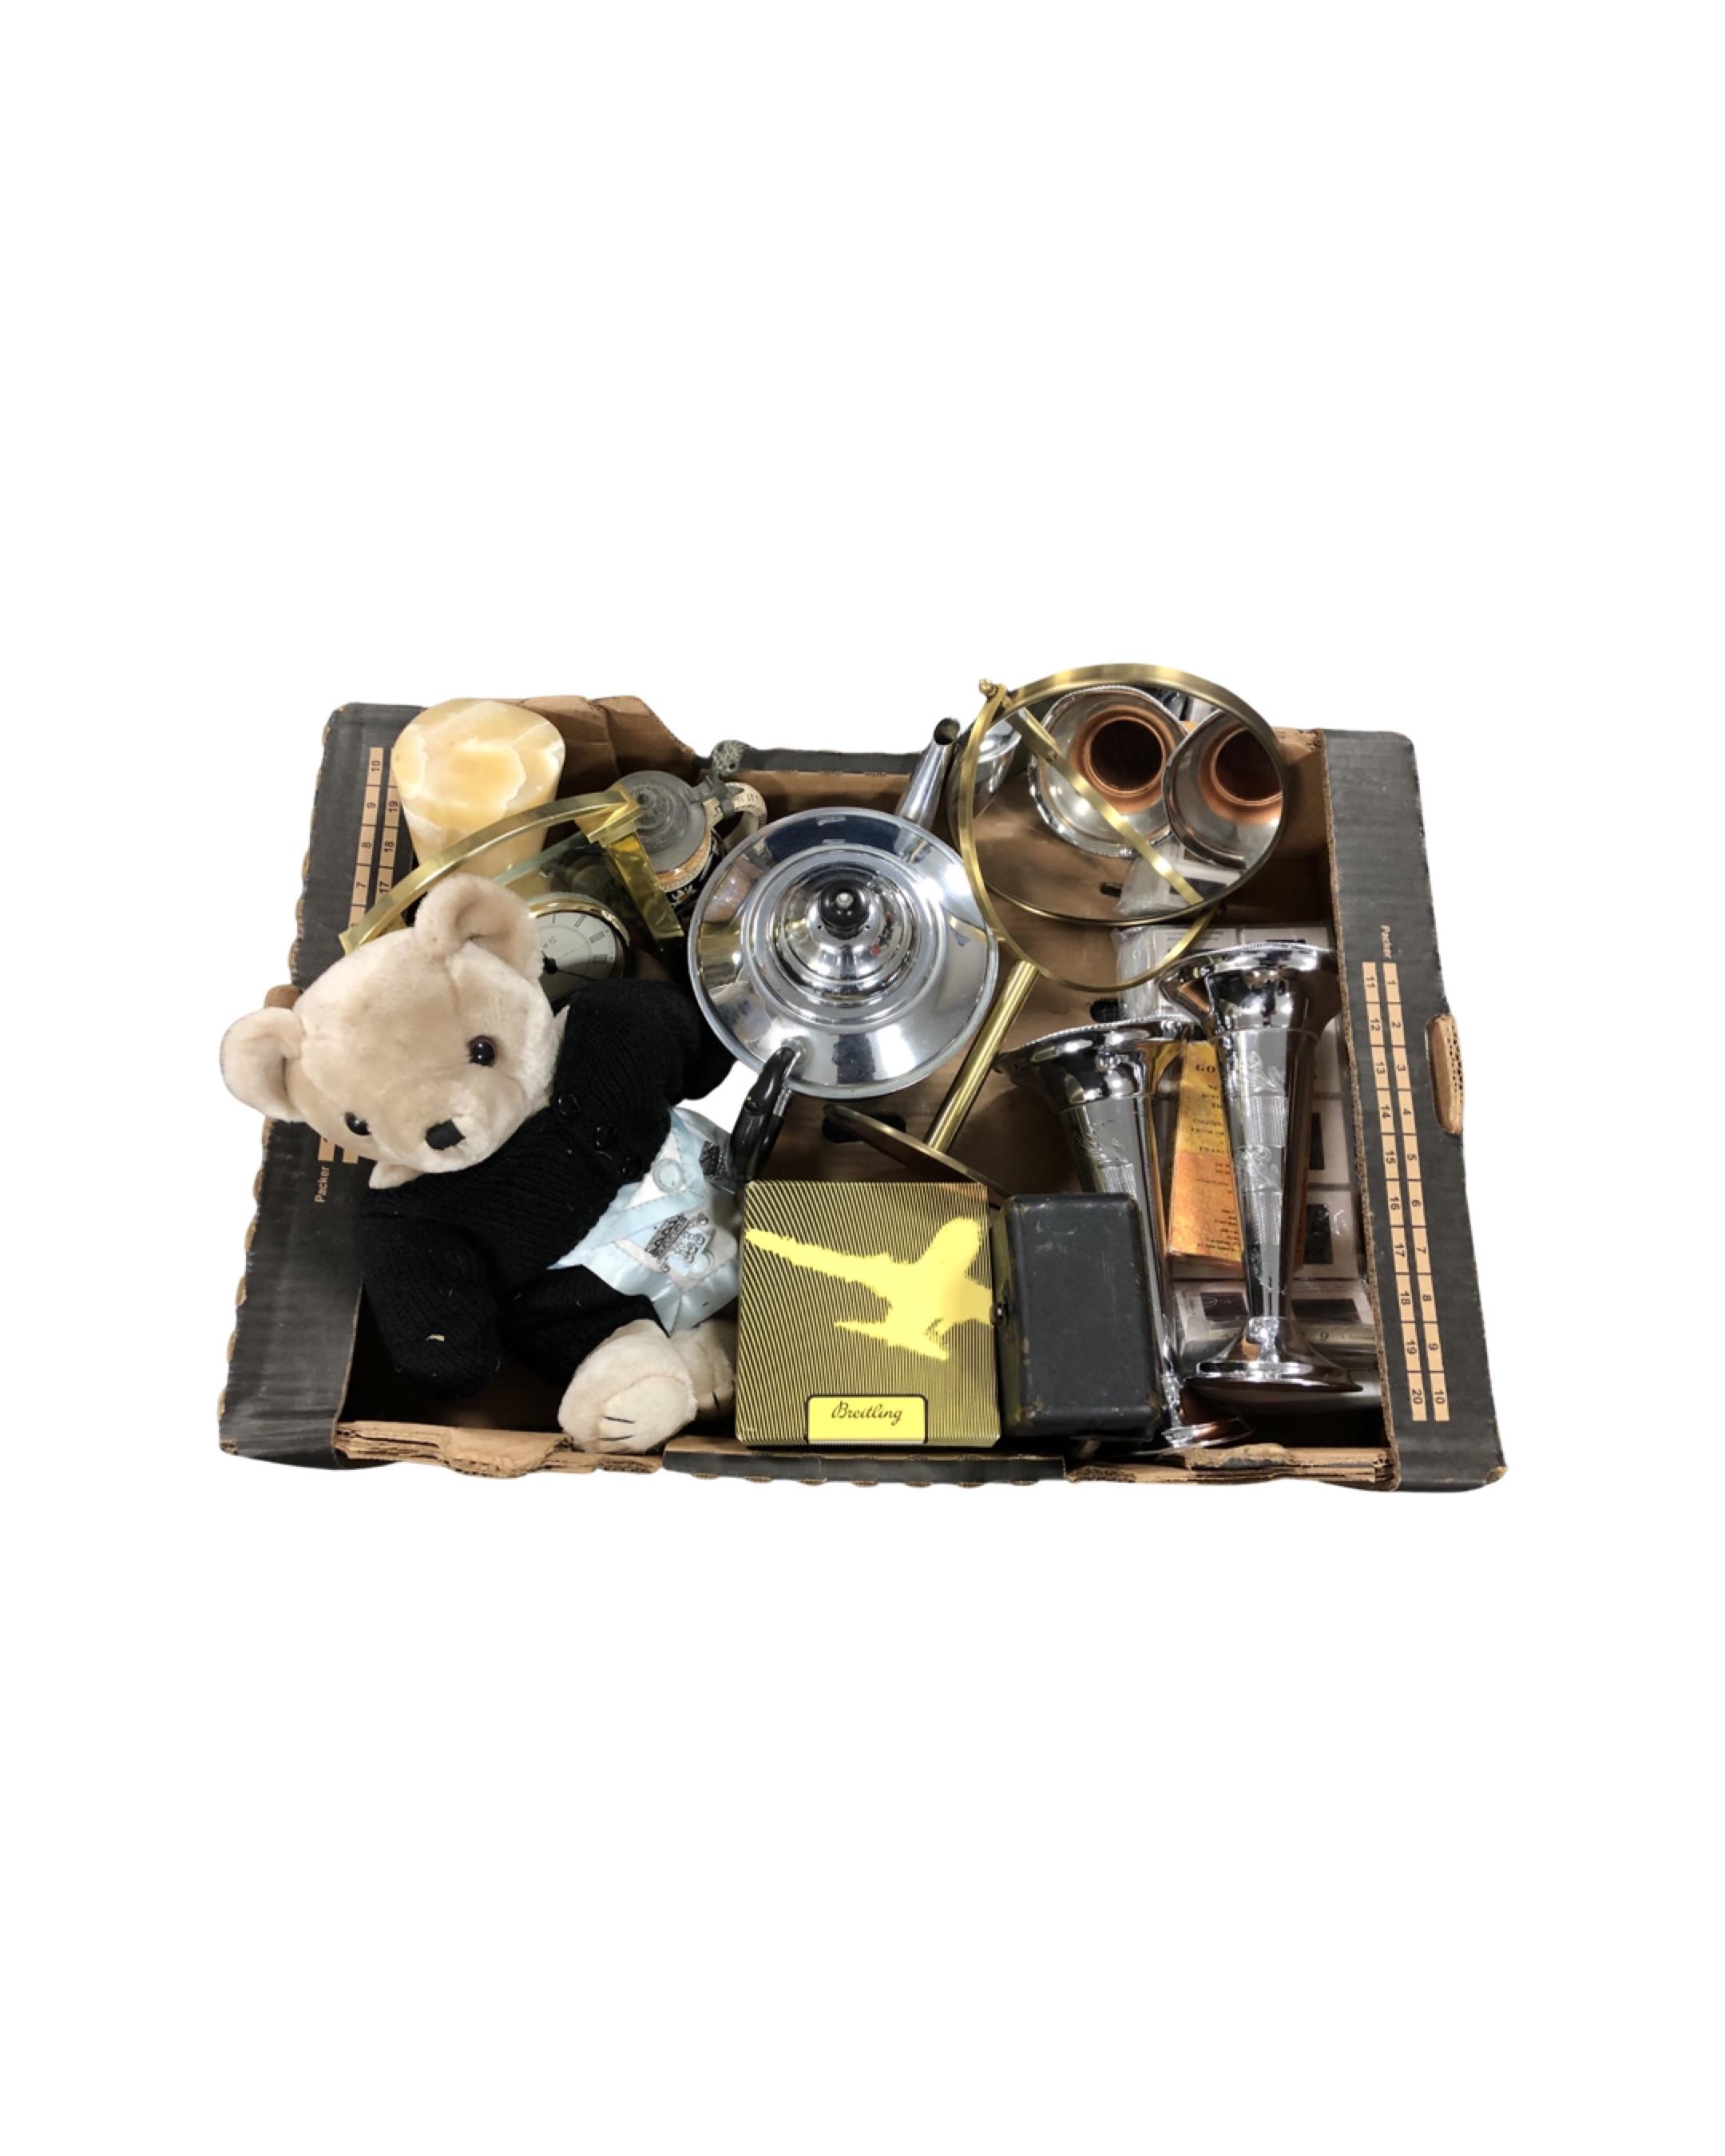 A box containing a teddy bear, Megger meter, plated wares, a Breitling watch box etc.